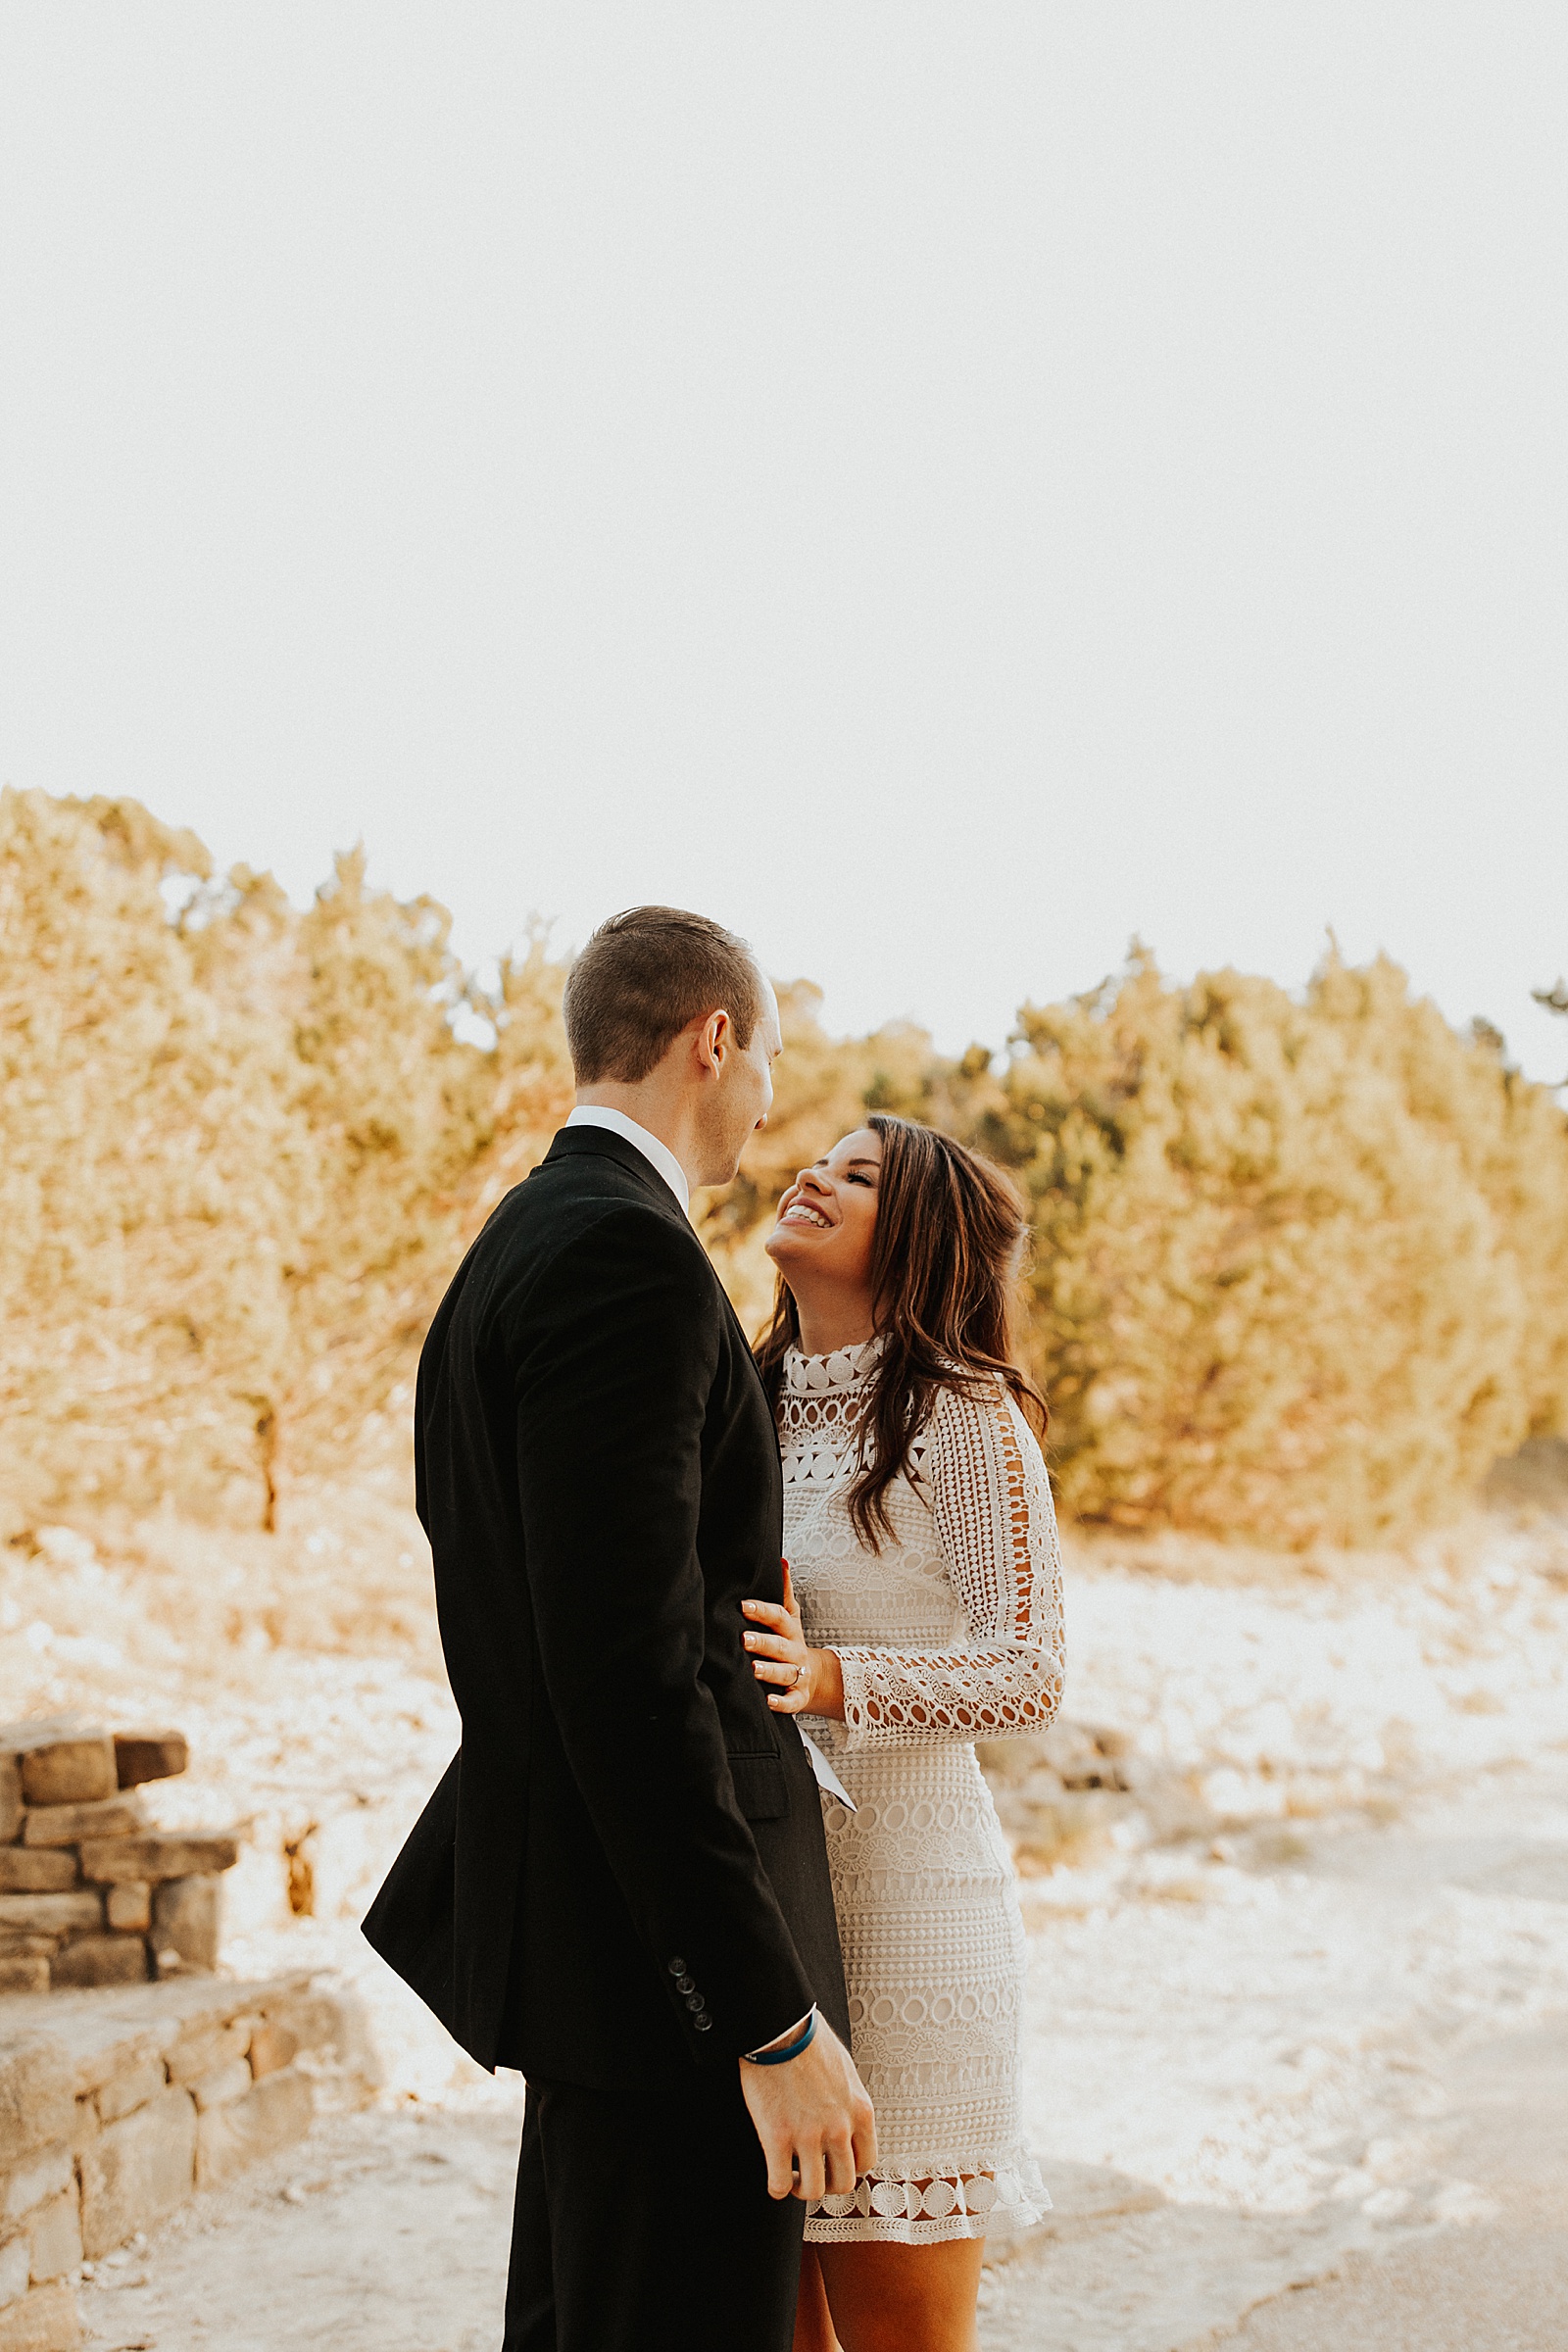 This Chapel Dulcinea wedding in Austin, TX was so special and intimate!